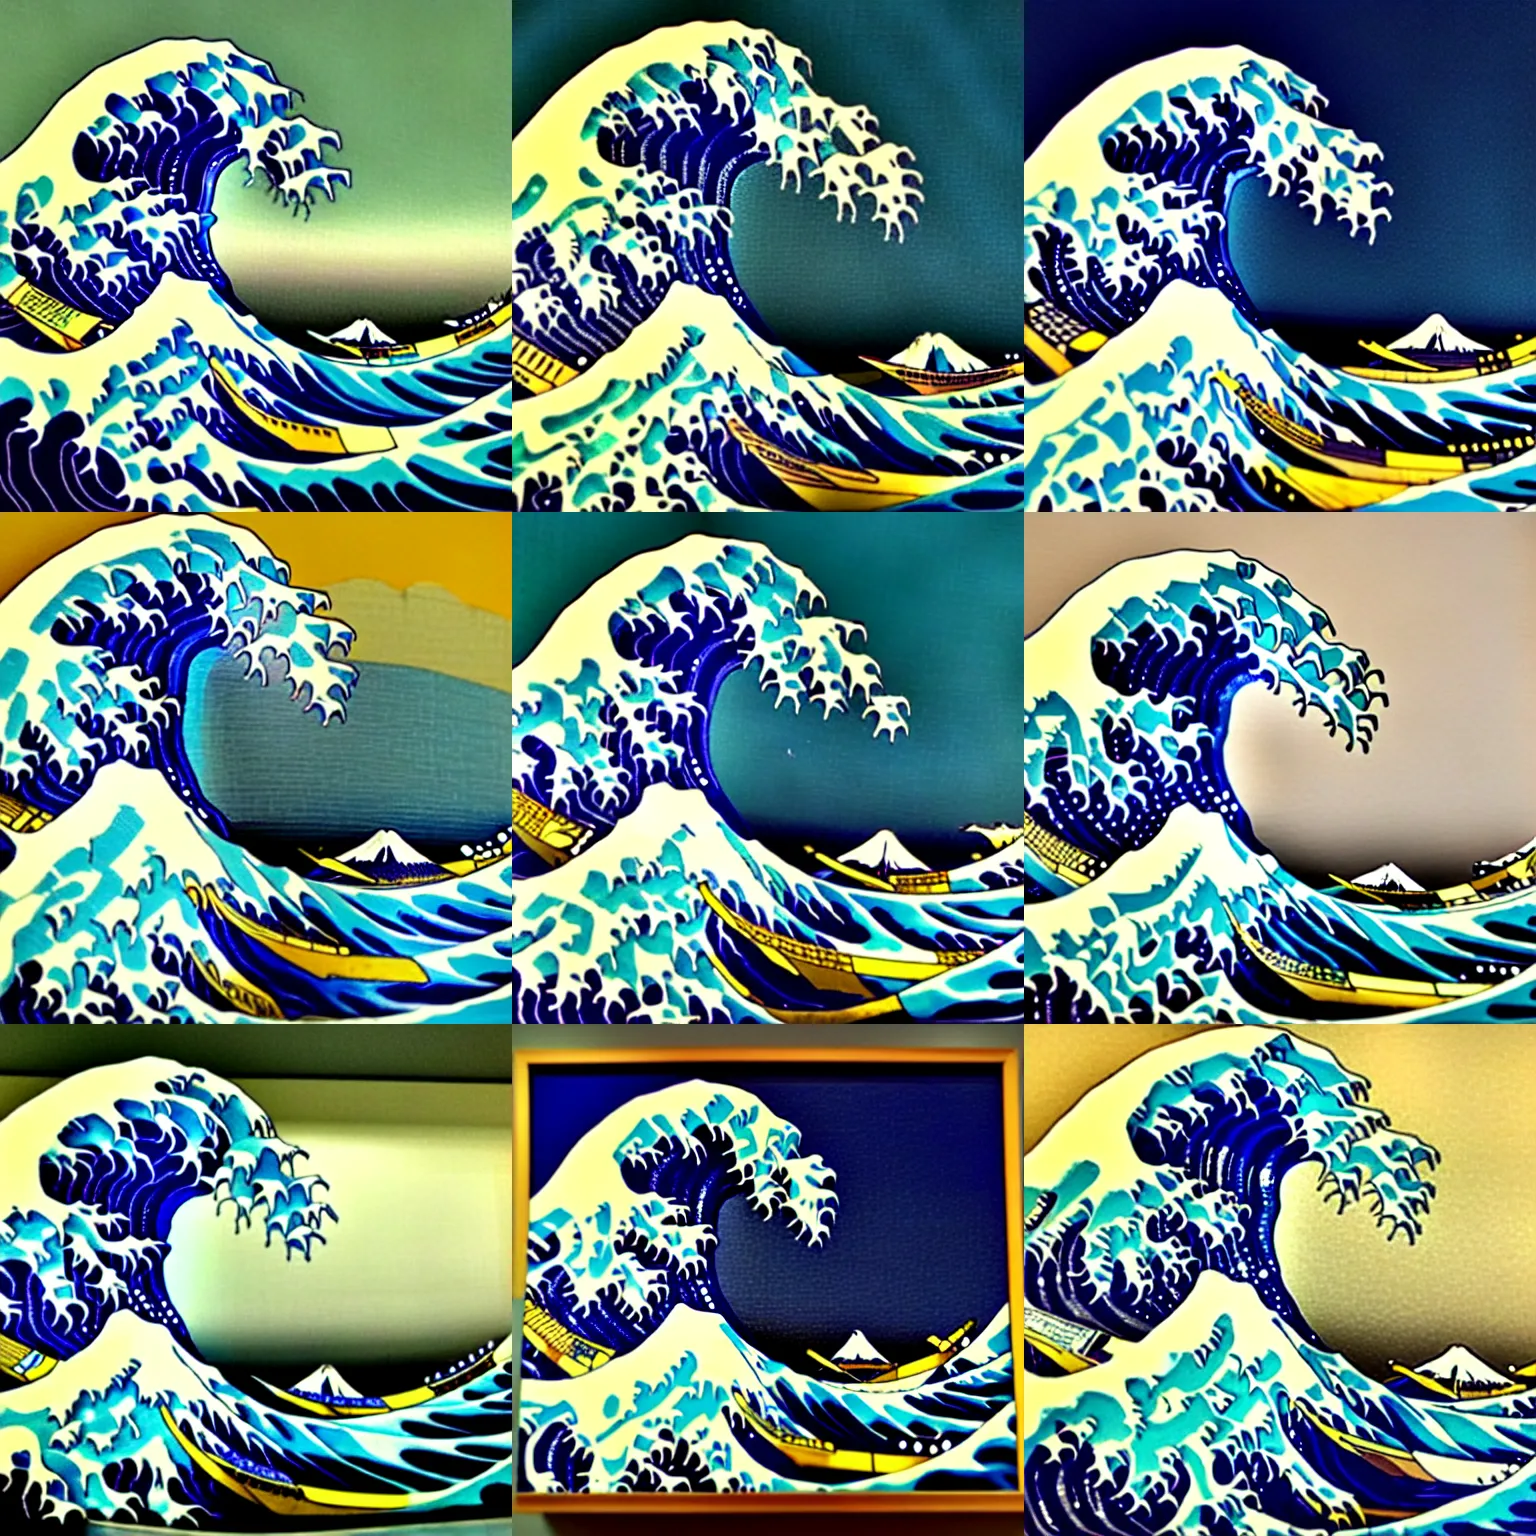 Prompt: A sculpture off The Great Wave of Kanagawa